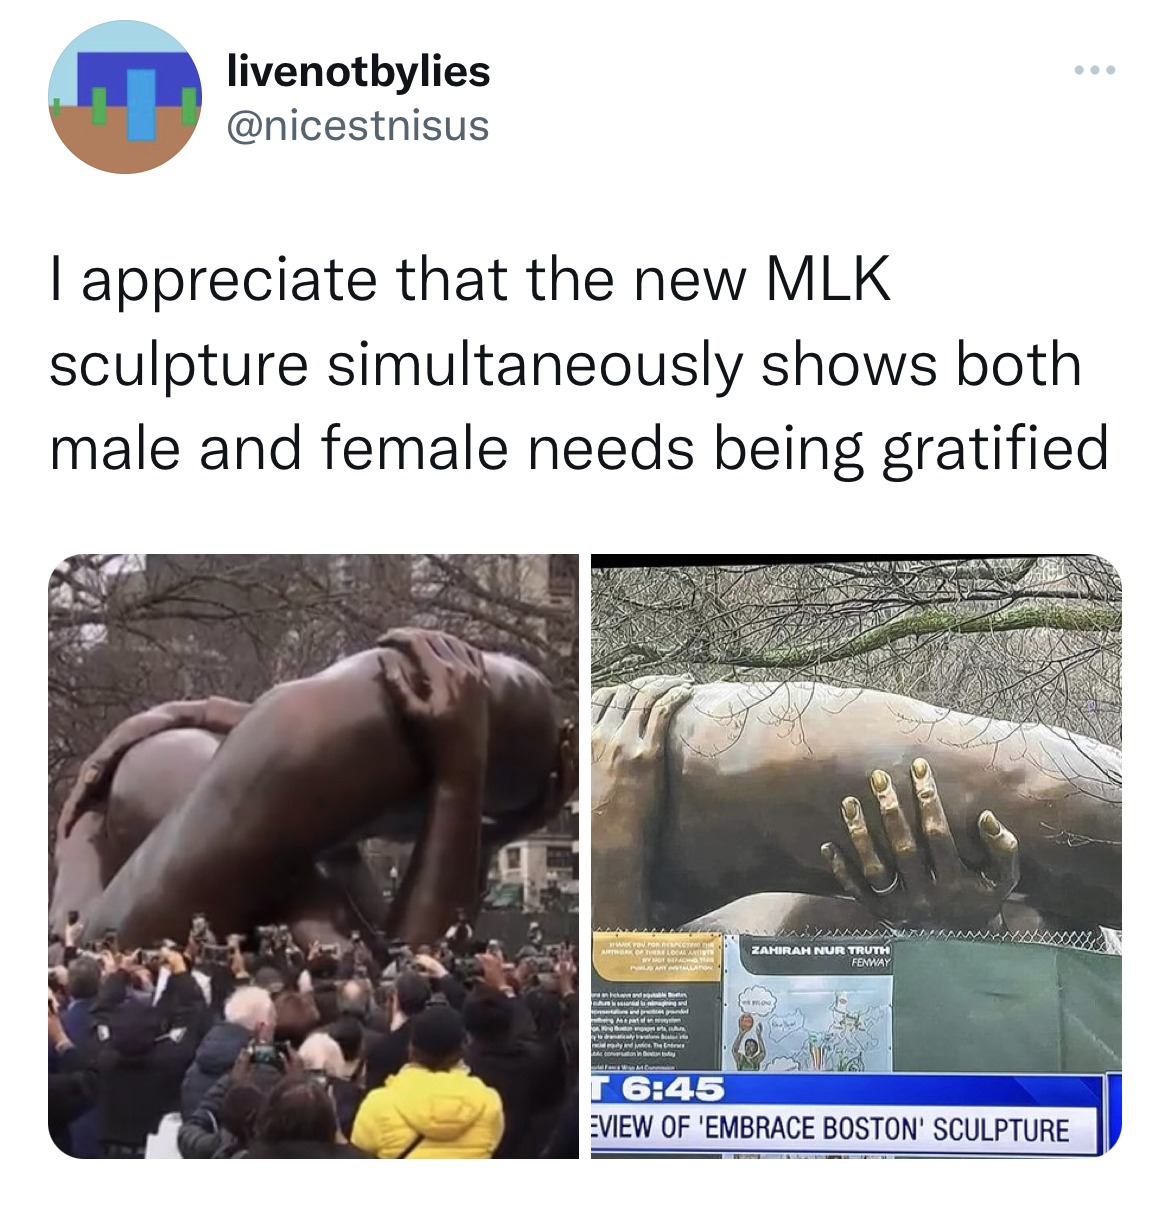 MLK Jr. Sculpture memes - palace of culture rafael uribe uribe - livenotbylies I appreciate that the new Mlk sculpture simultaneously shows both male and female needs being gratified C Sebas Zahahar Truth Eview Of 'Embrace Boston' Sculpture